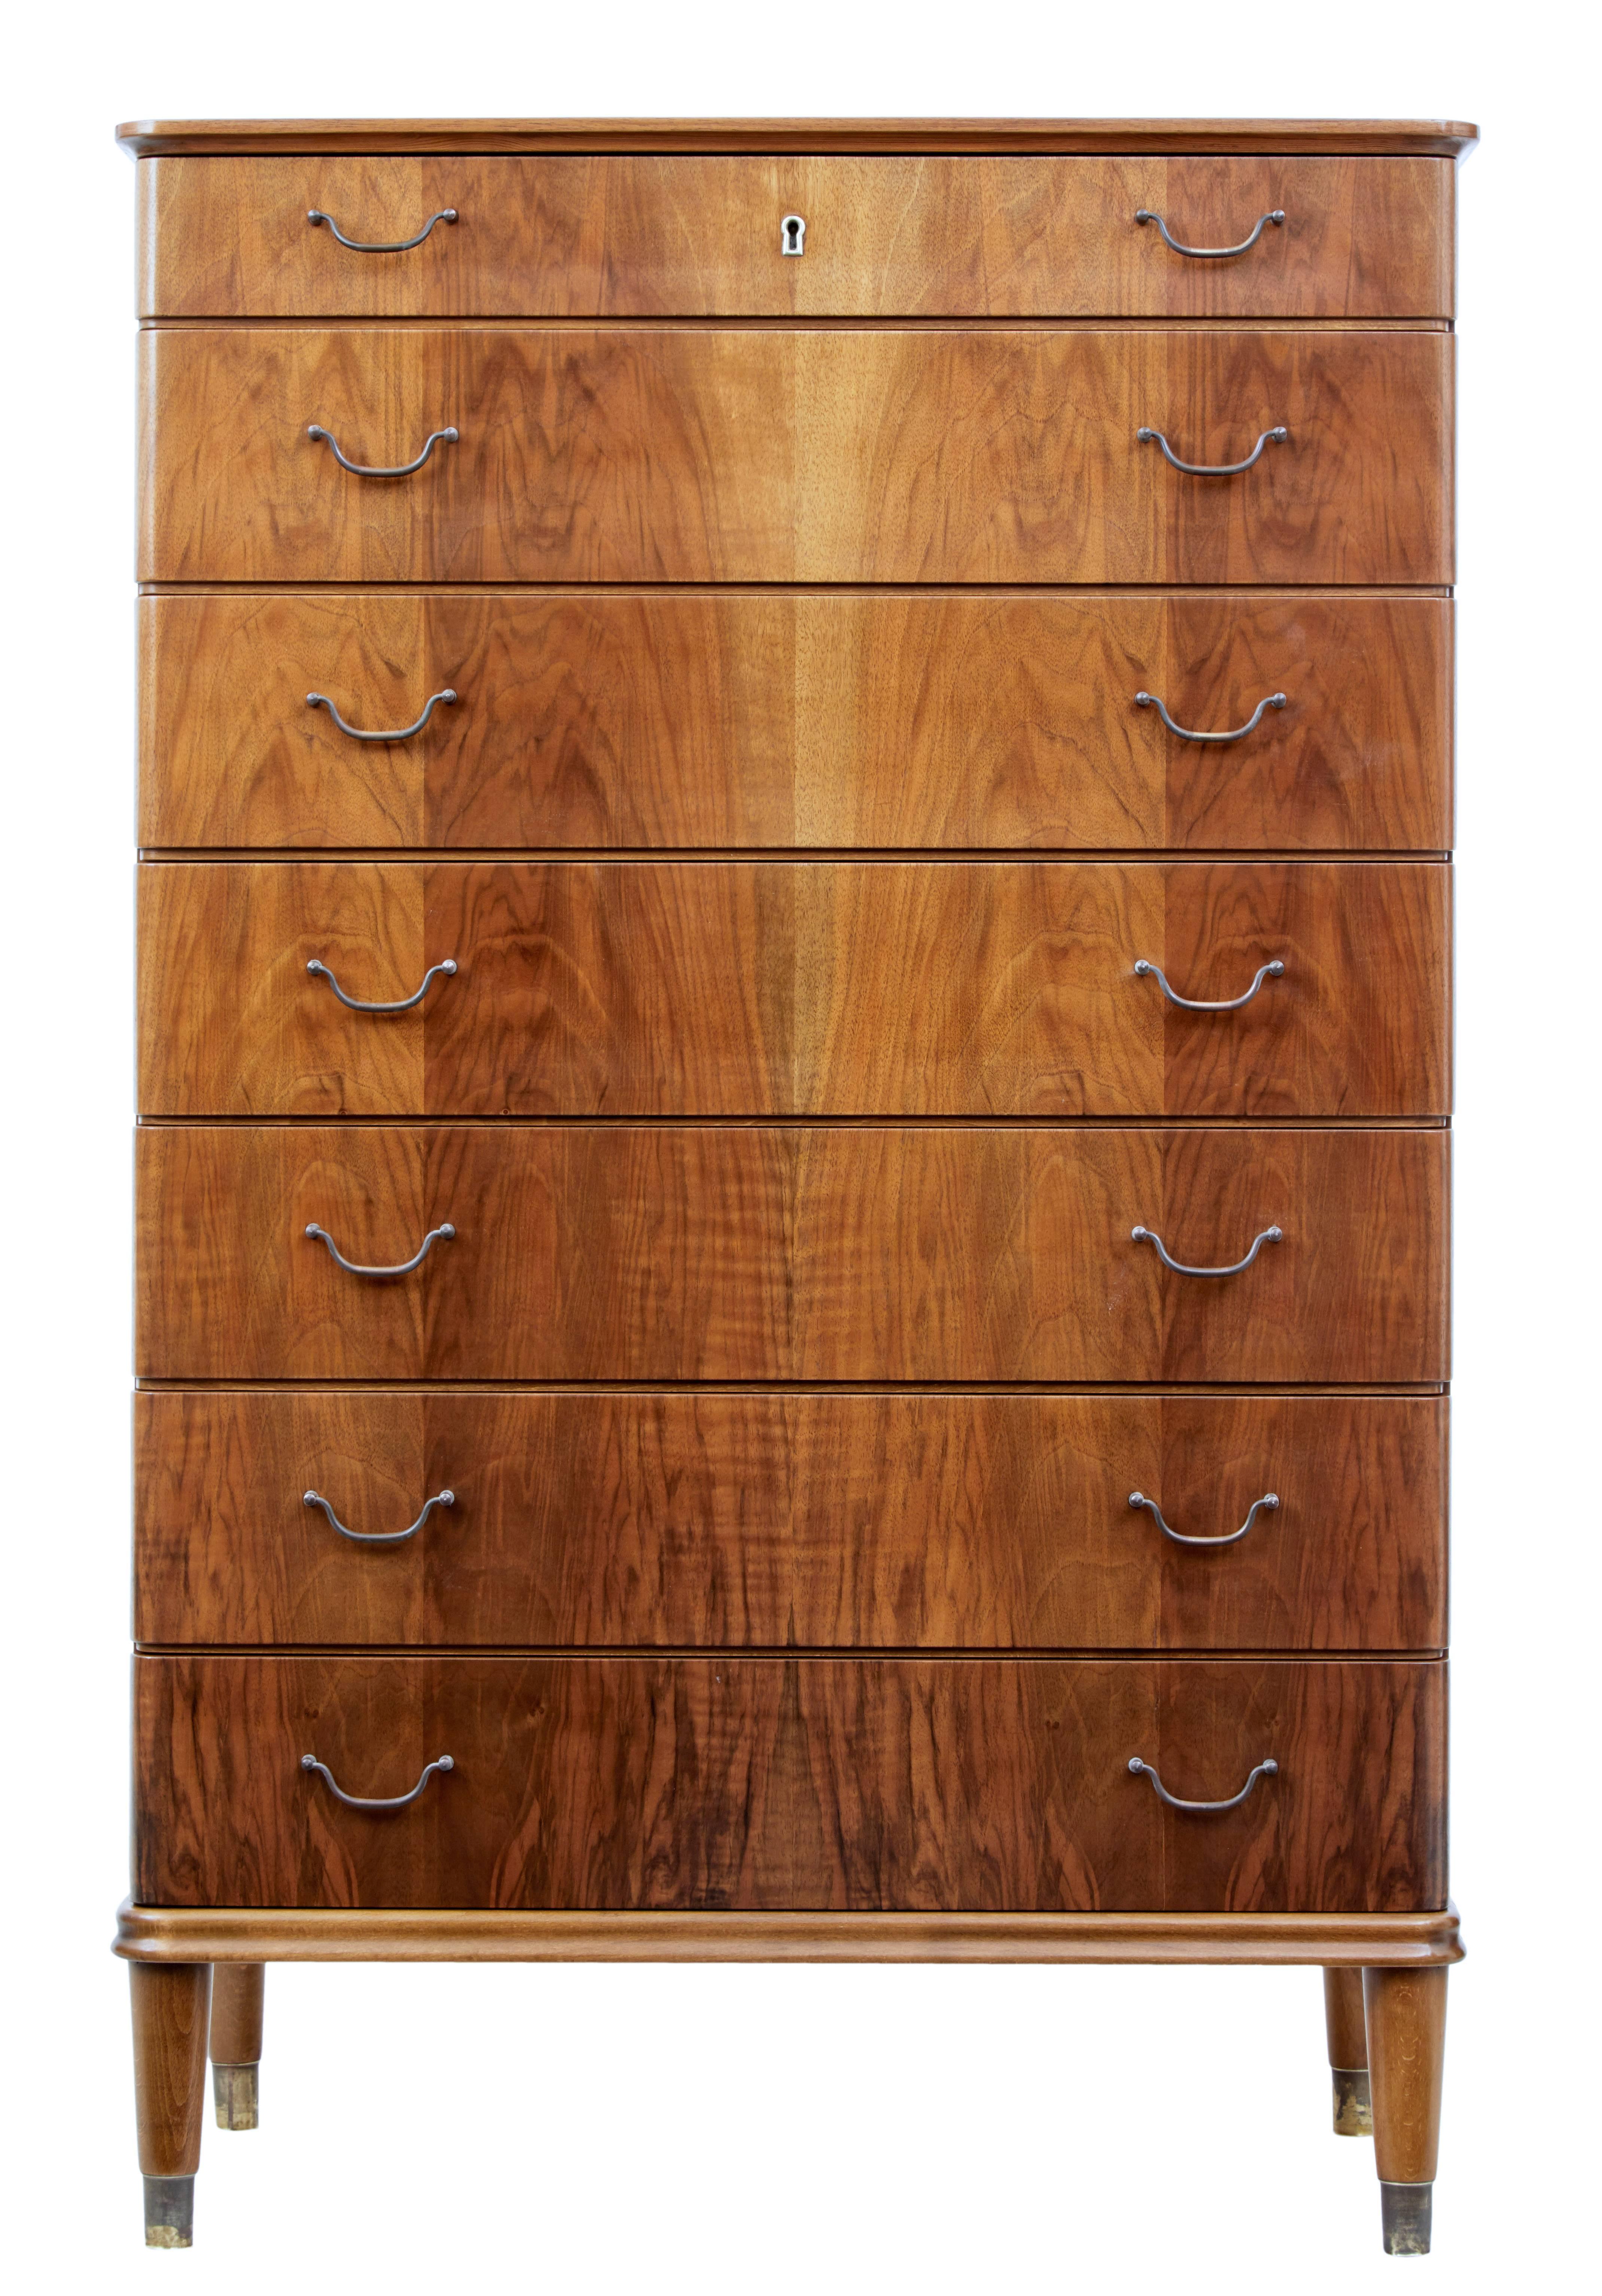 Fine quality rosewood chest of drawers made by Omann Jun's mobelfabrik.

Stamped with makers mark and model number 140.

Seven drawers, top with lock and two keys. All drawers fitted with sleek brass handles.

Standing on four tapered feet and